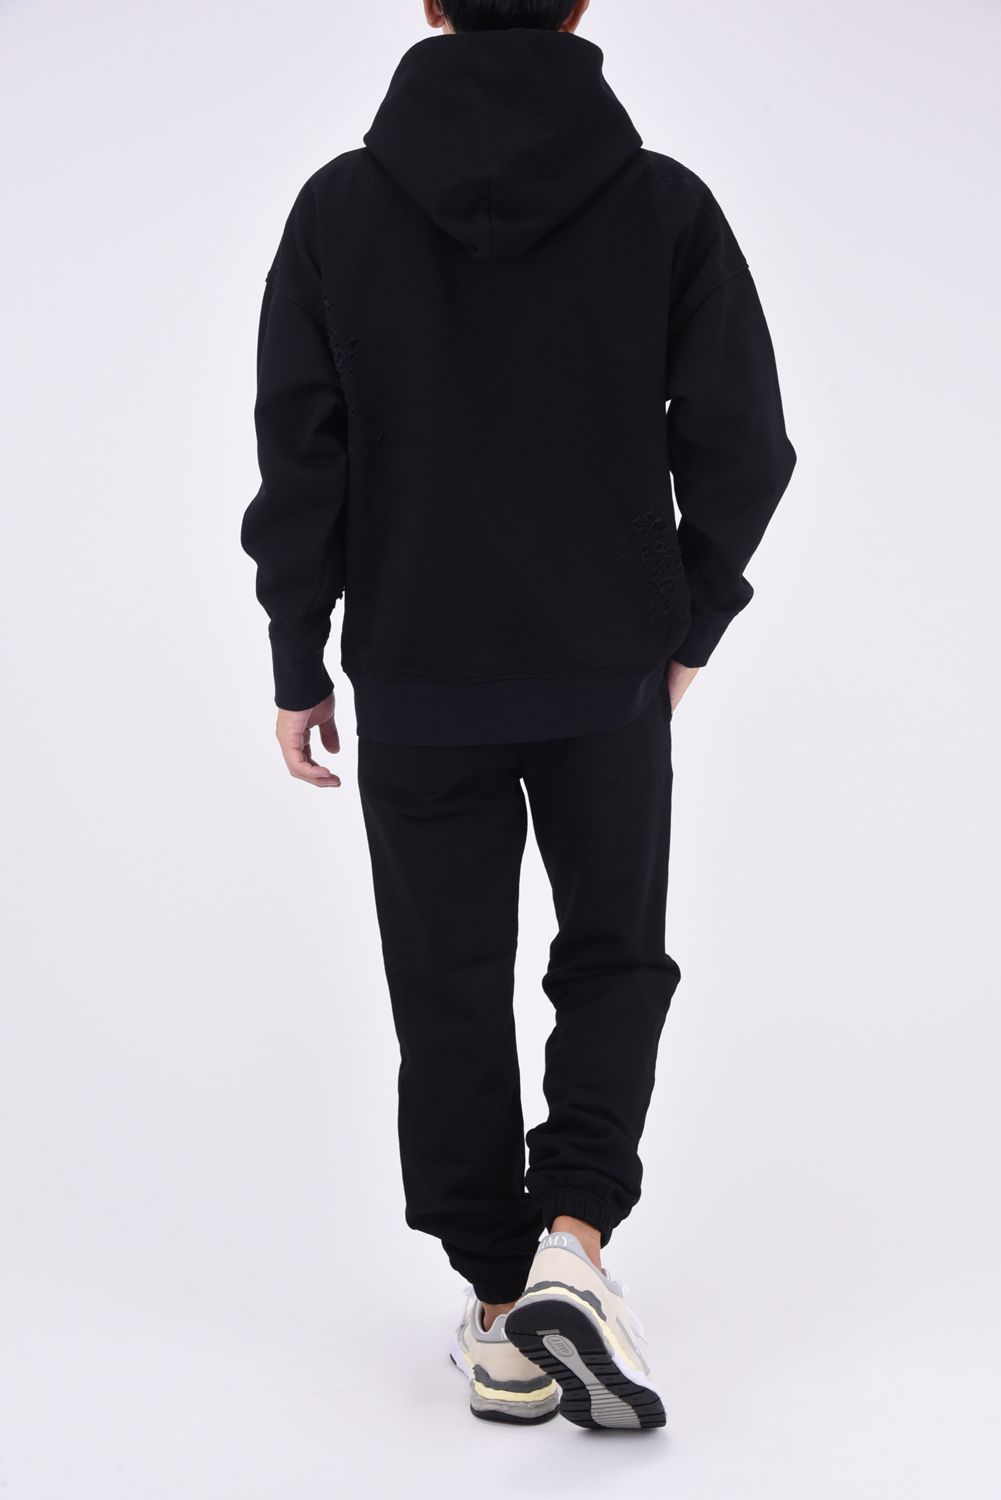 RESOUND CLOTHING - 【STAFF RECOMMENDED ITEM】 MIKE SWEAT PANTS